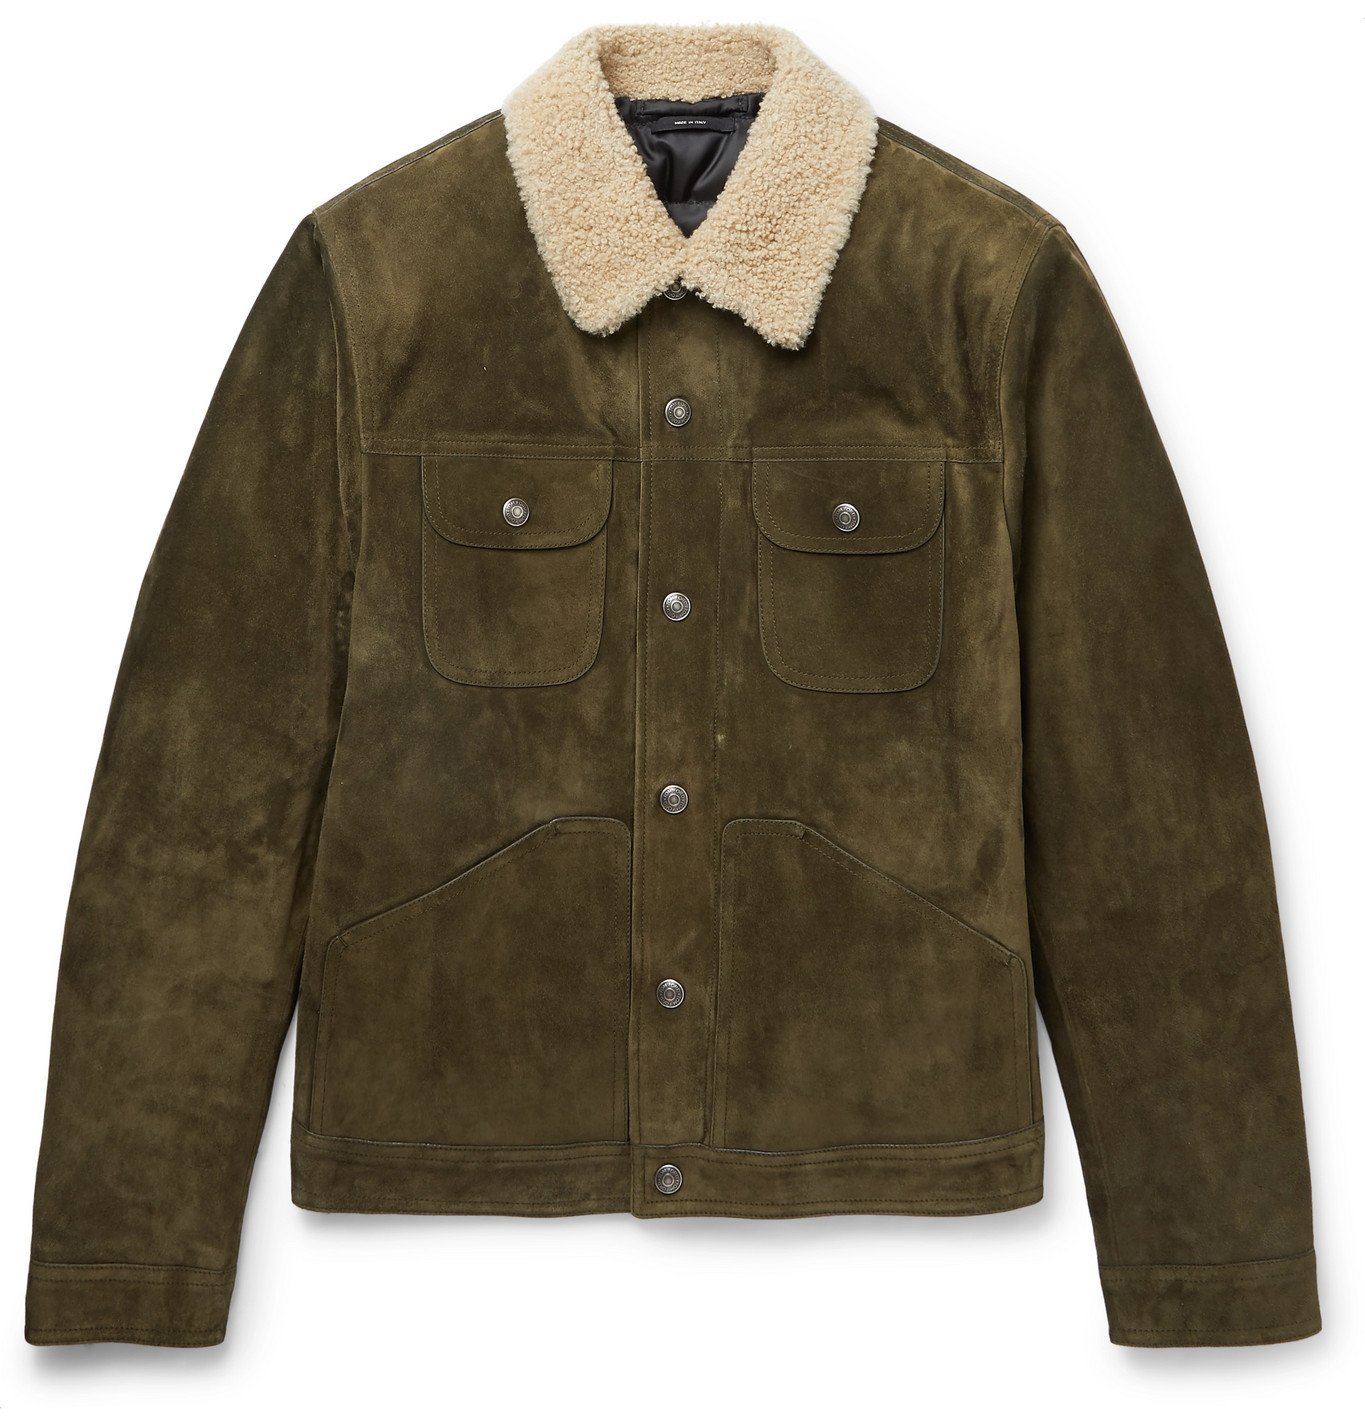 TOM FORD - Shearling-Trimmed Suede Jacket - Green TOM FORD